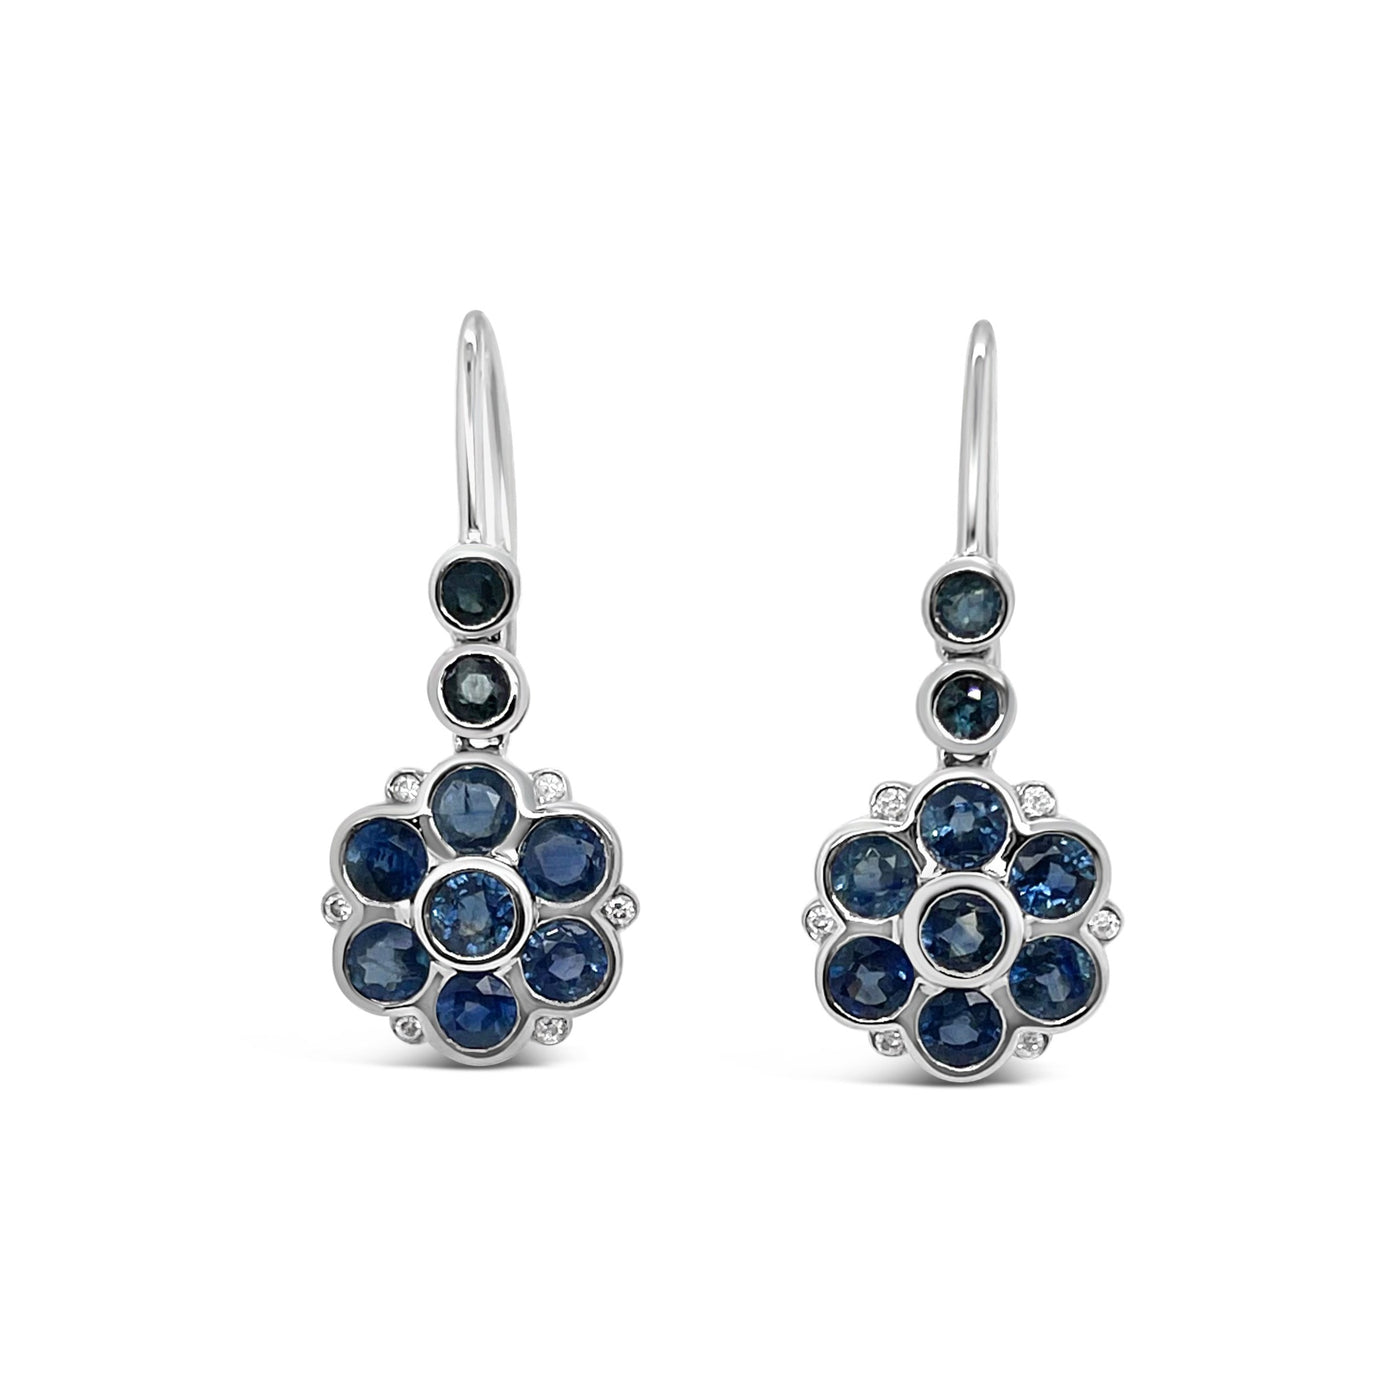 18CT White Gold Sapphire and Diamond Earrings